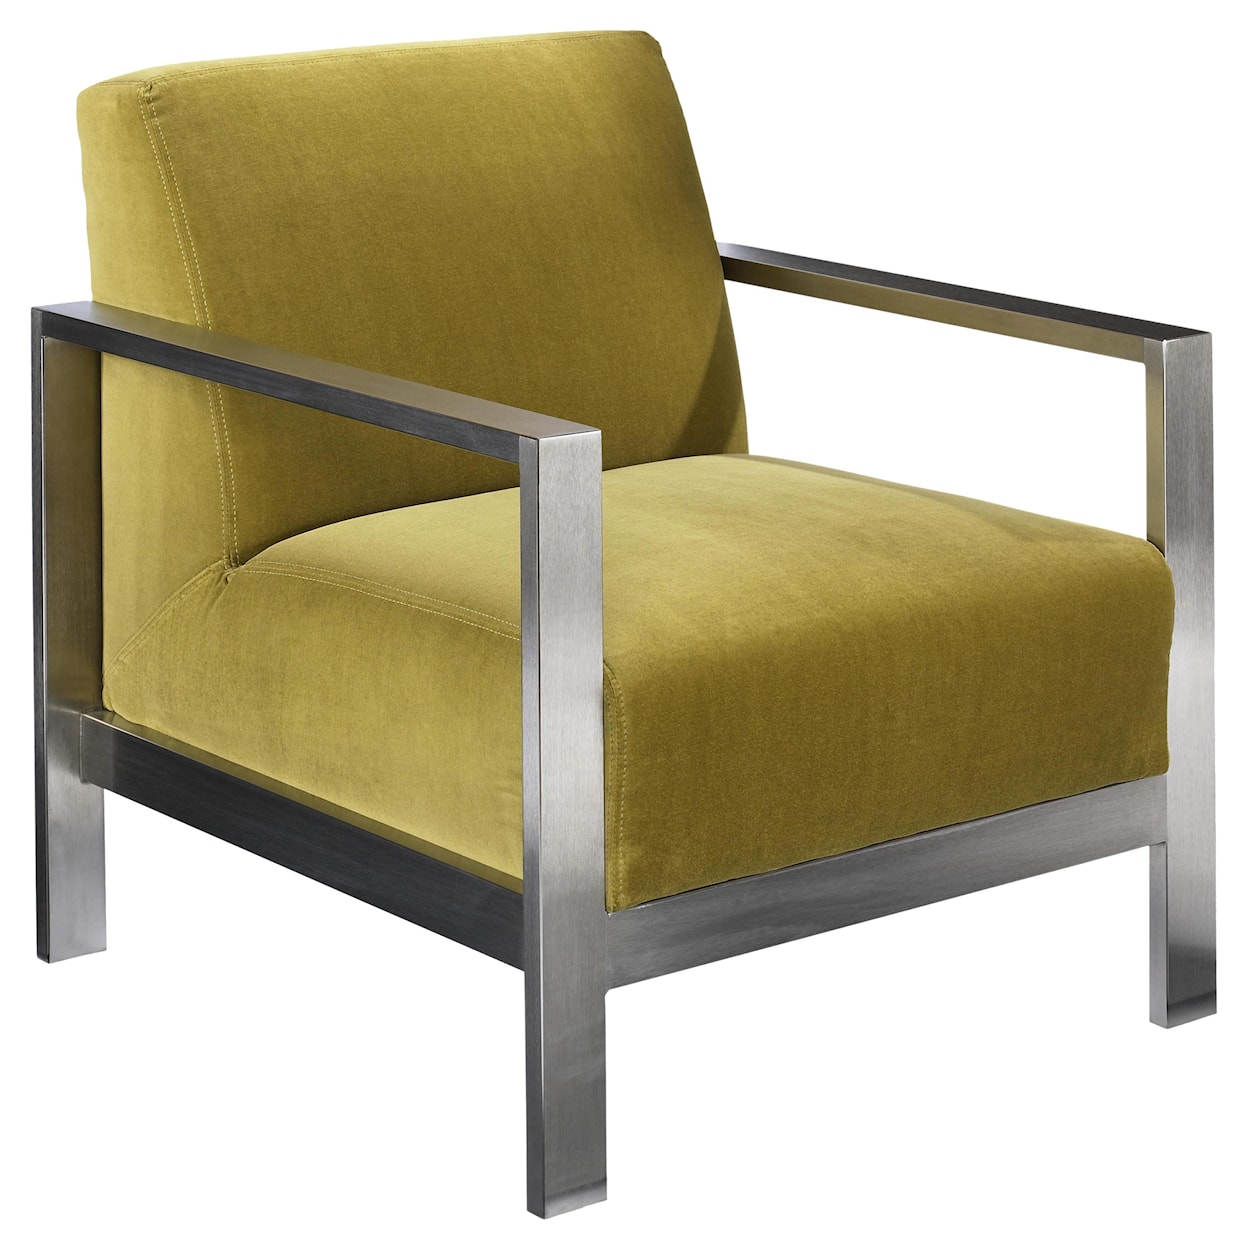 Jonathan Louis Accentuates Morrissey Metal Accent Chair